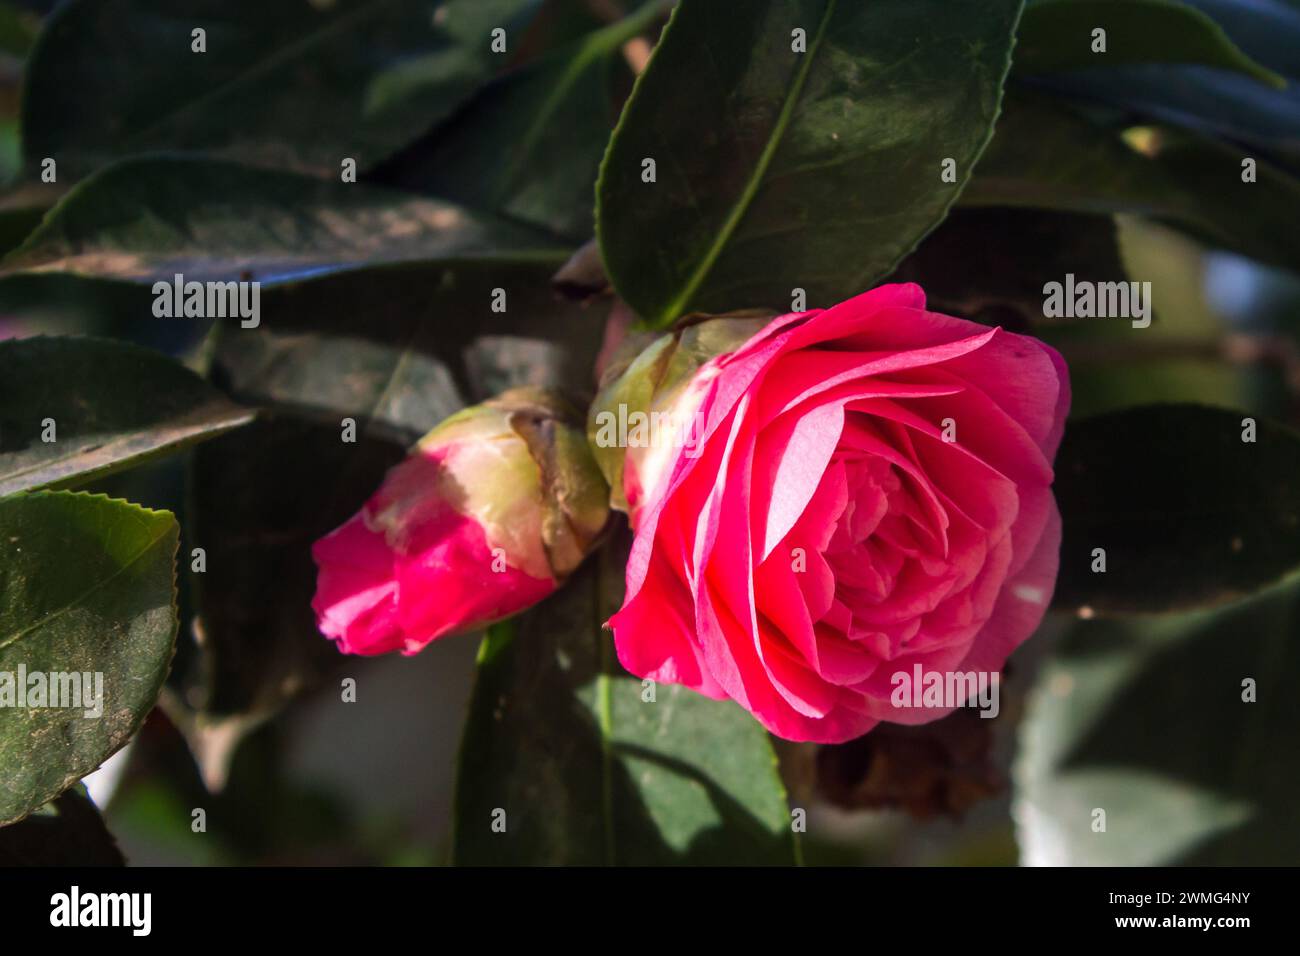 An intricate pink flower with a flower bud, of a Japanese Camellia hybrid. Stock Photo